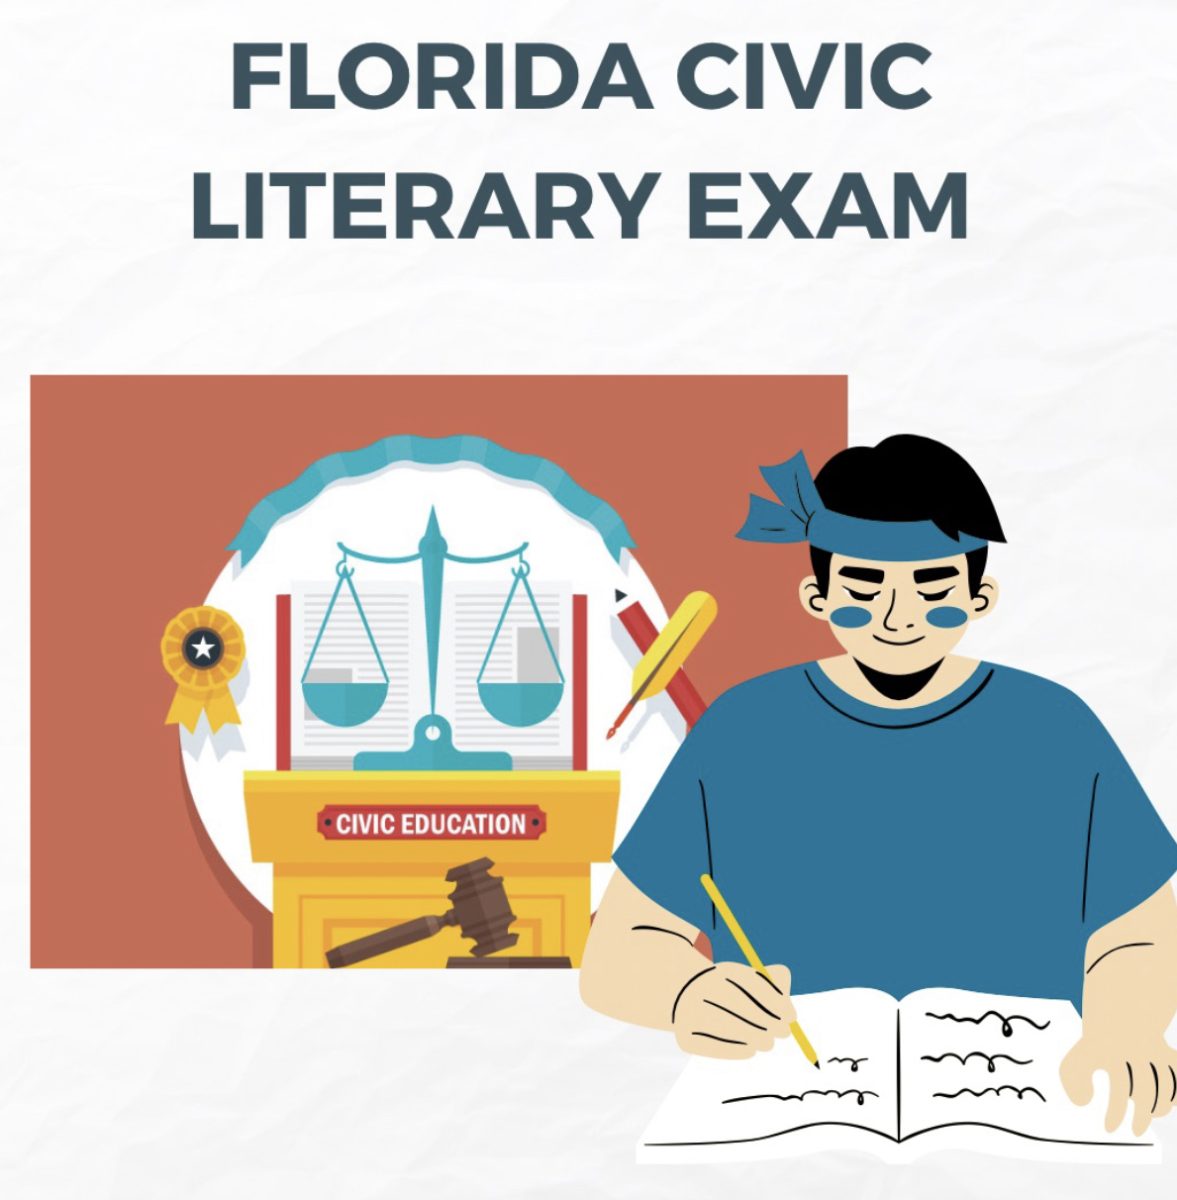 FCLE+stands+for+The+Florida+Civic+Literary+Exam.